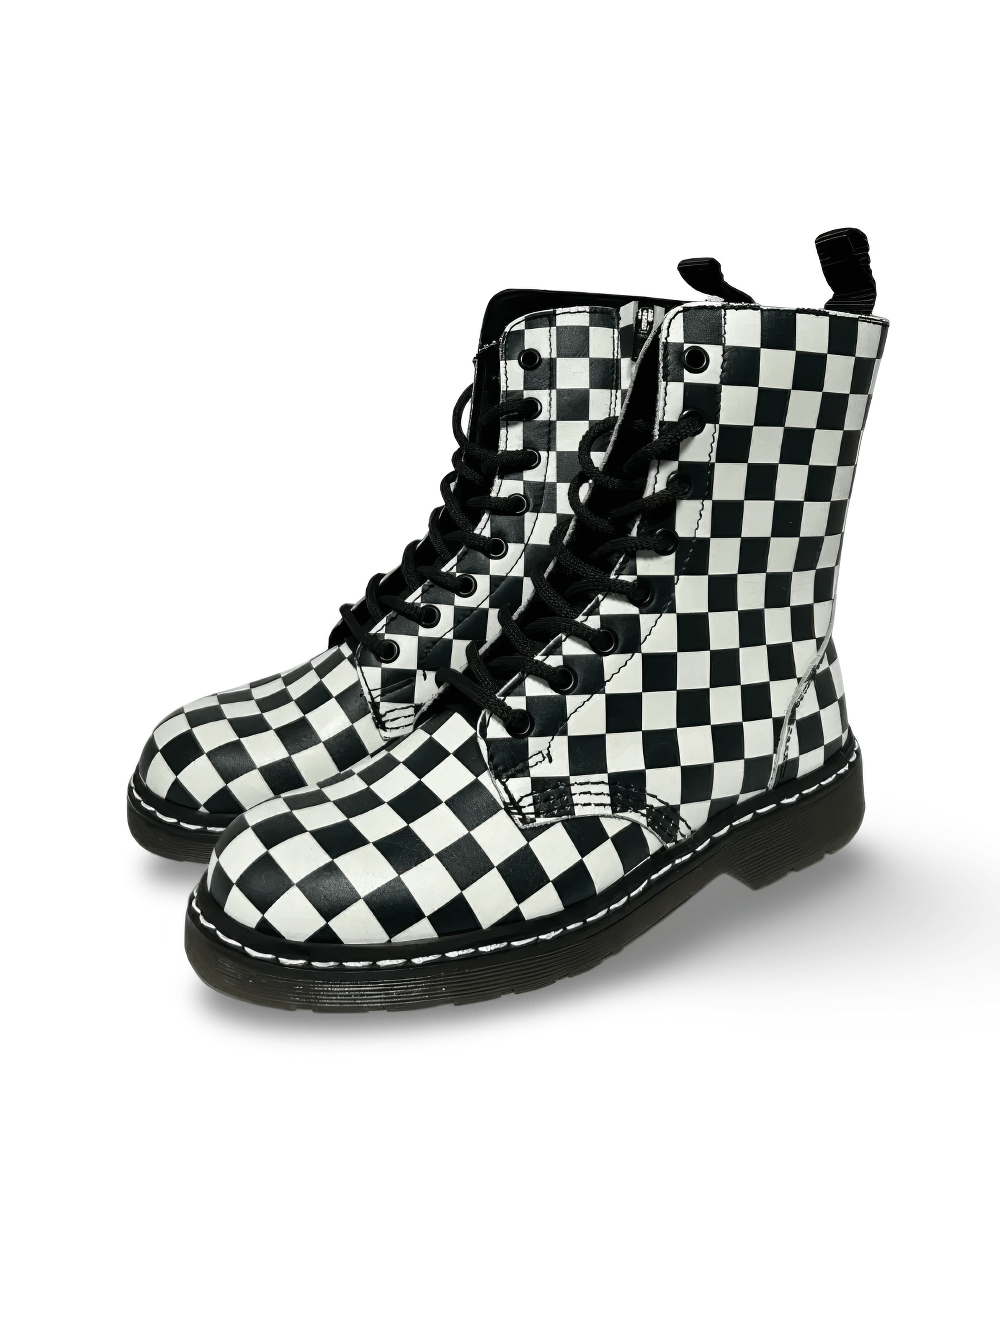 Women's Chessboard Pattern Leather Ankle Boots